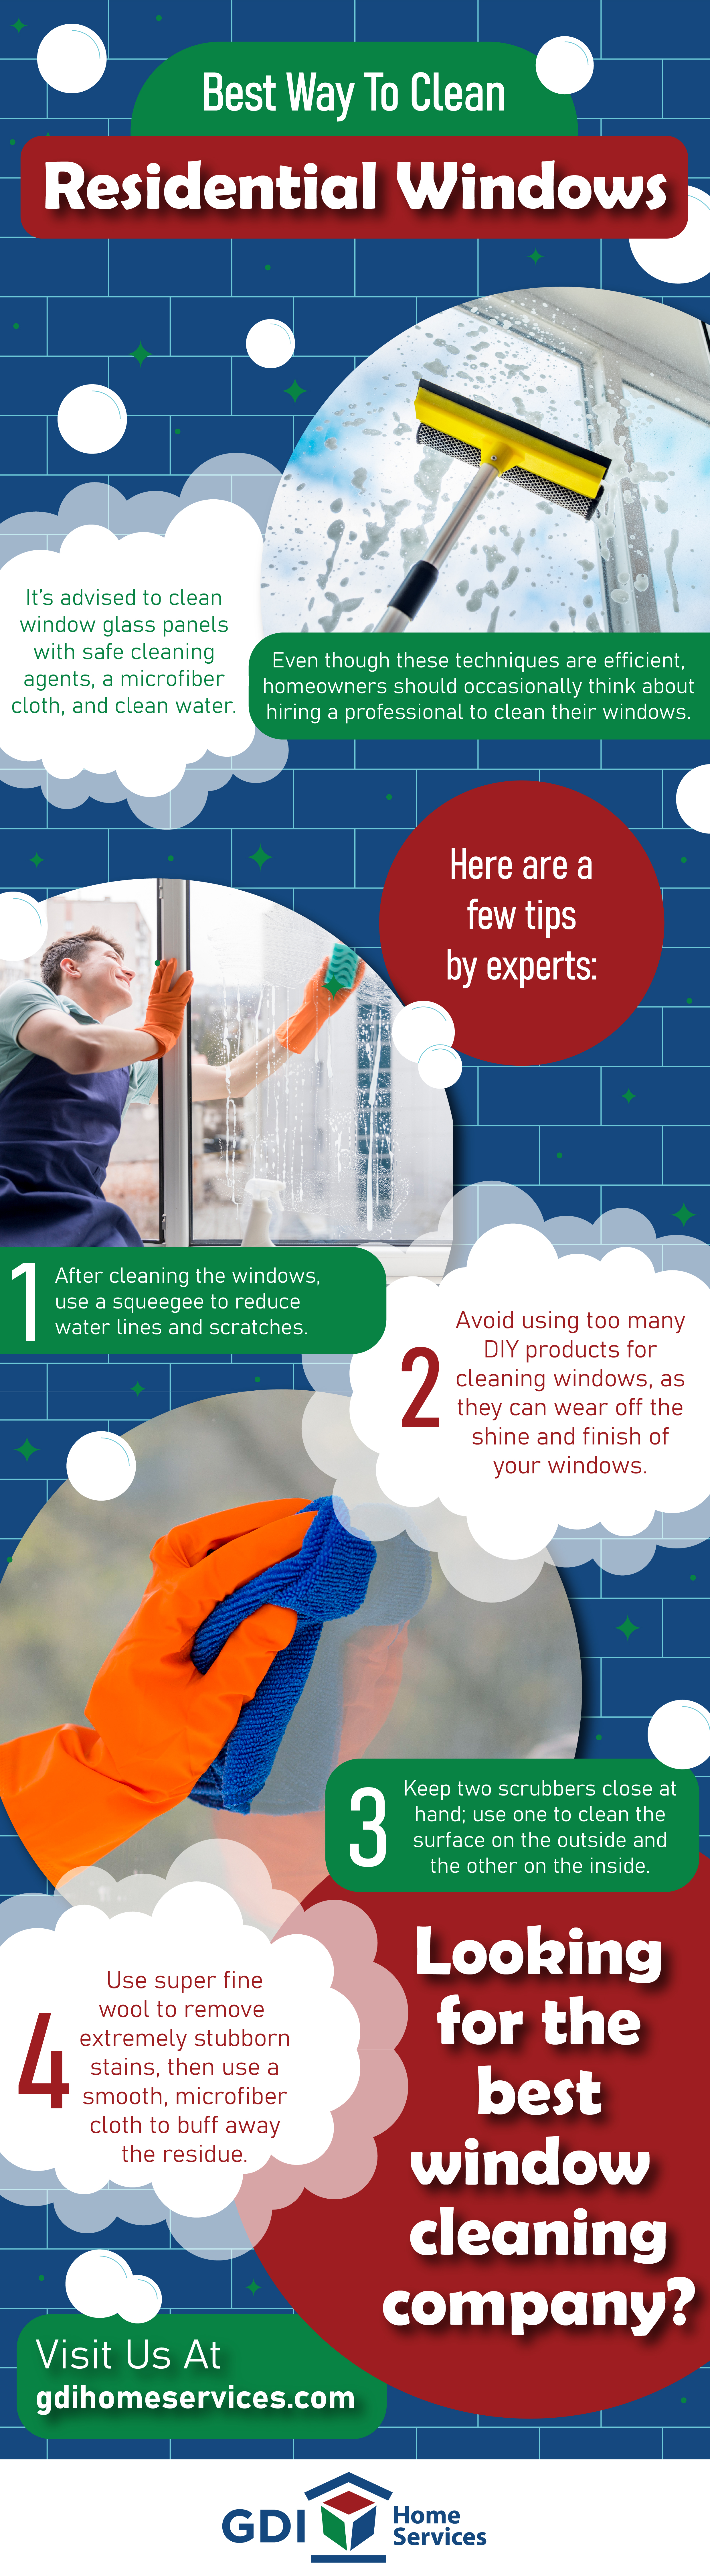 Best Way To Clean Residential Windows - Infograph